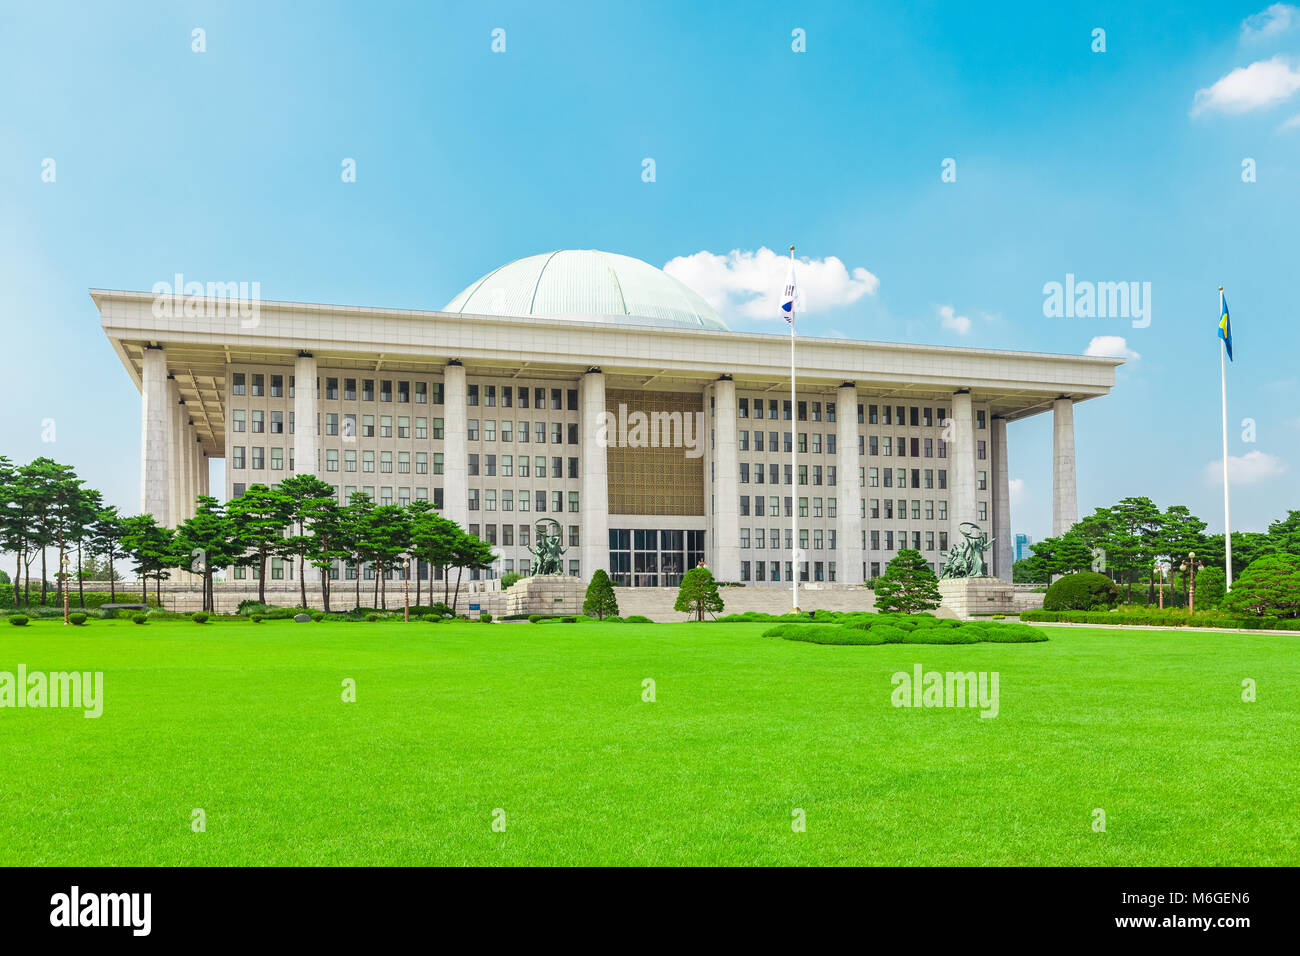 SEOUL, KOREA - AUGUST 14, 2015: Building of National Assembly Proceeding Hall - South Korean Capitol building - located on Yeouido island - Seoul, Rep Stock Photo